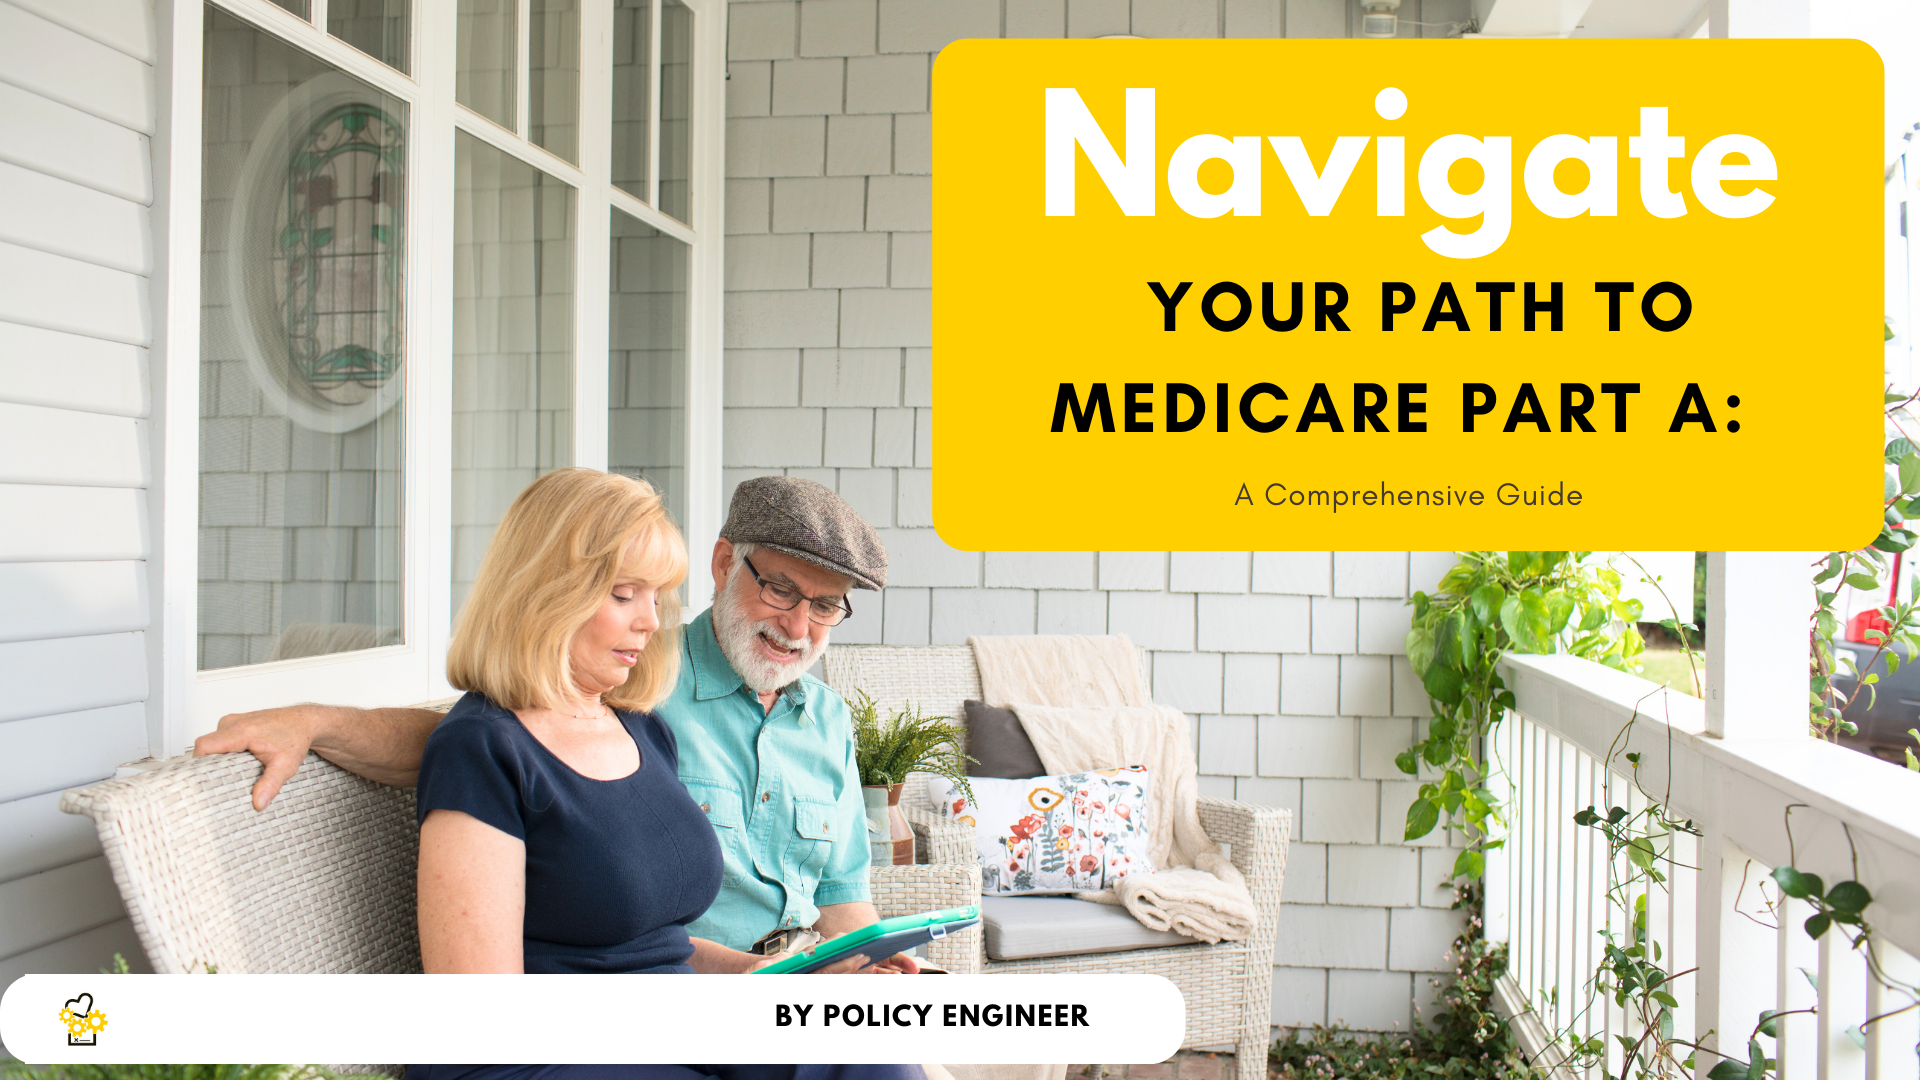 Make sure to avoid these two Medicare mistakes before enrolling